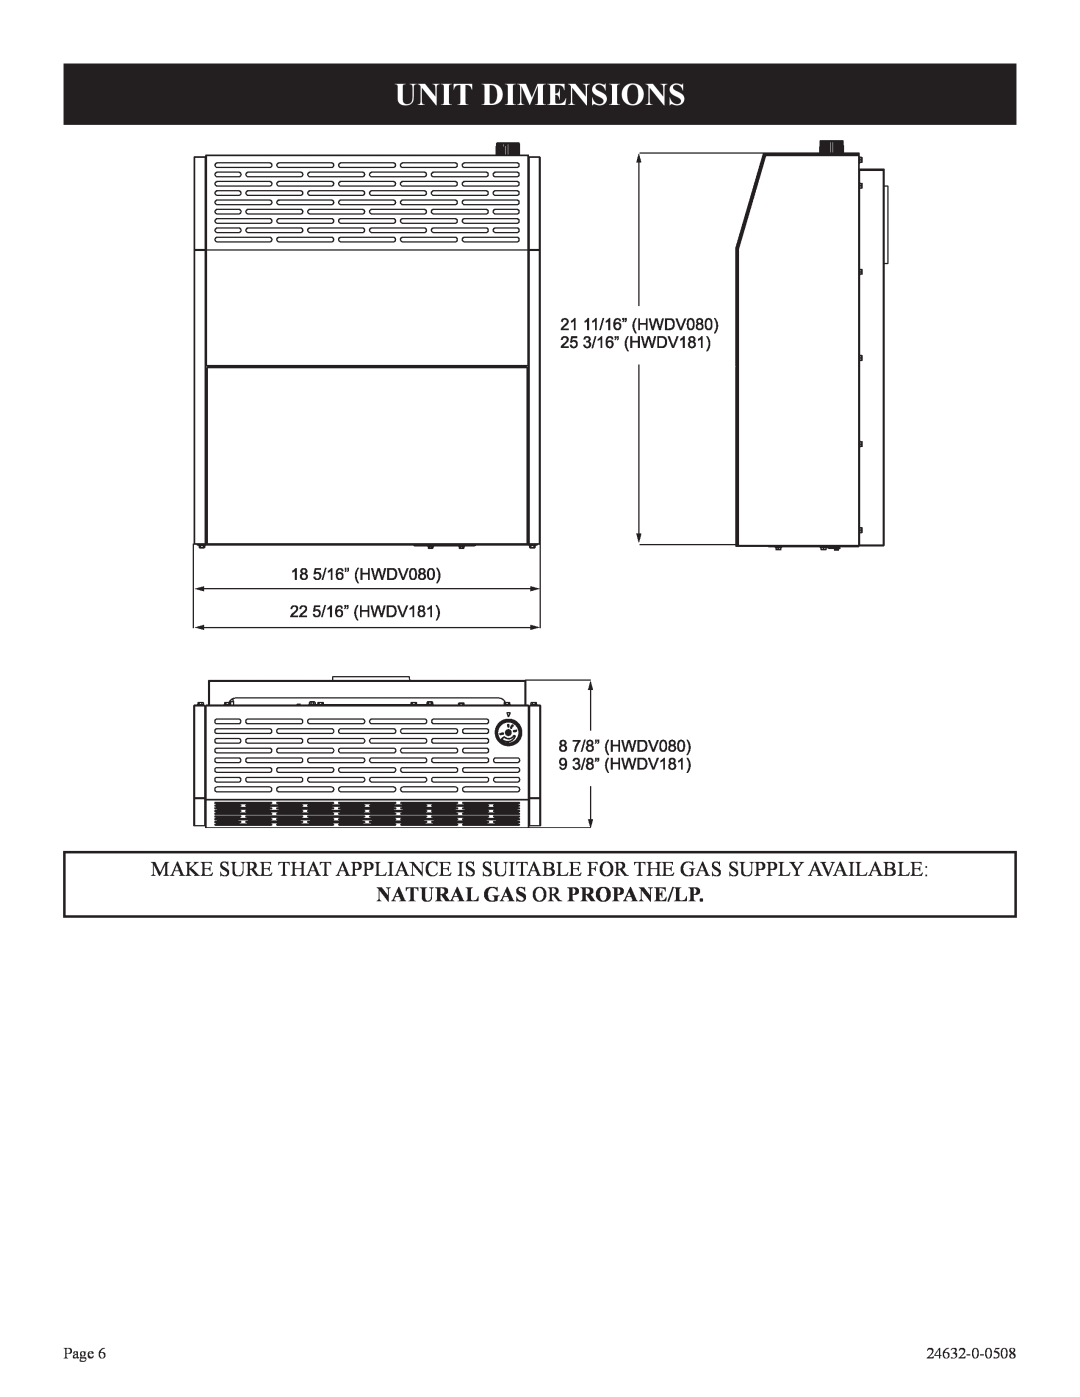 Epson HWDV080DV(N, P)-1 installation instructions Unit Dimensions, Natural Gas Or Propane/Lp, Page, 24632-0-0508 